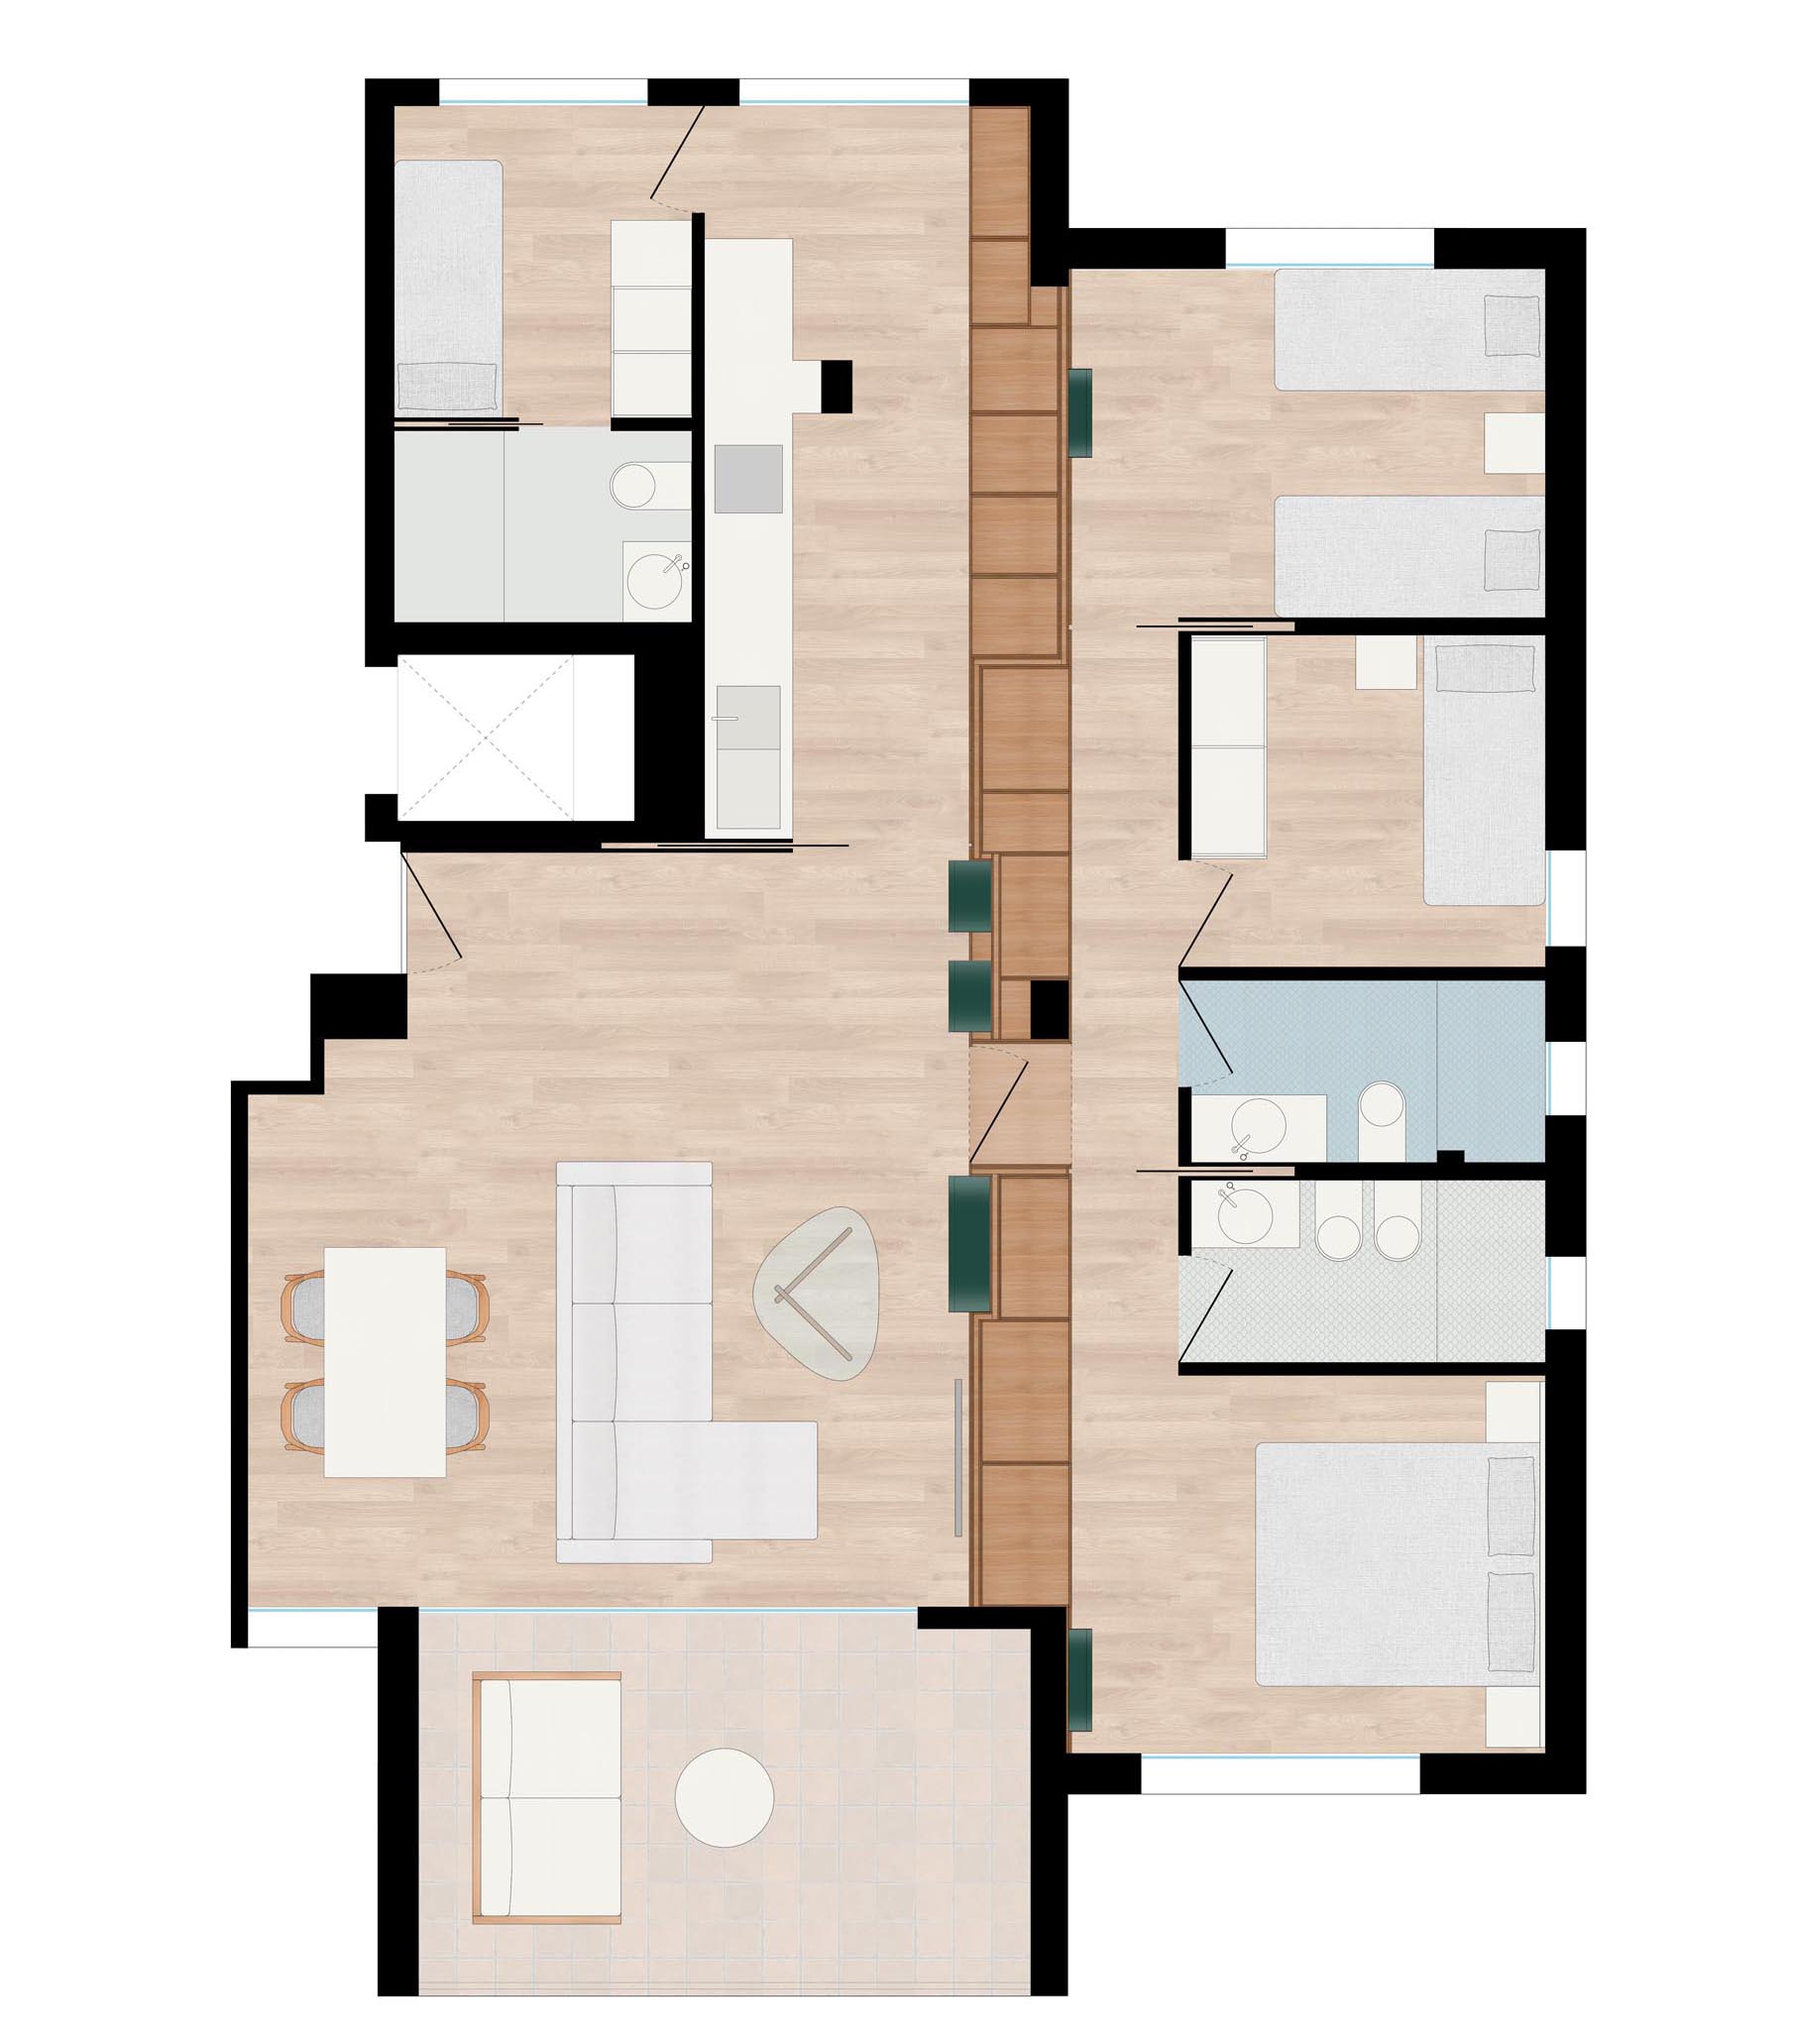 The floor plan of a modern apartment that has a wood storage wall.